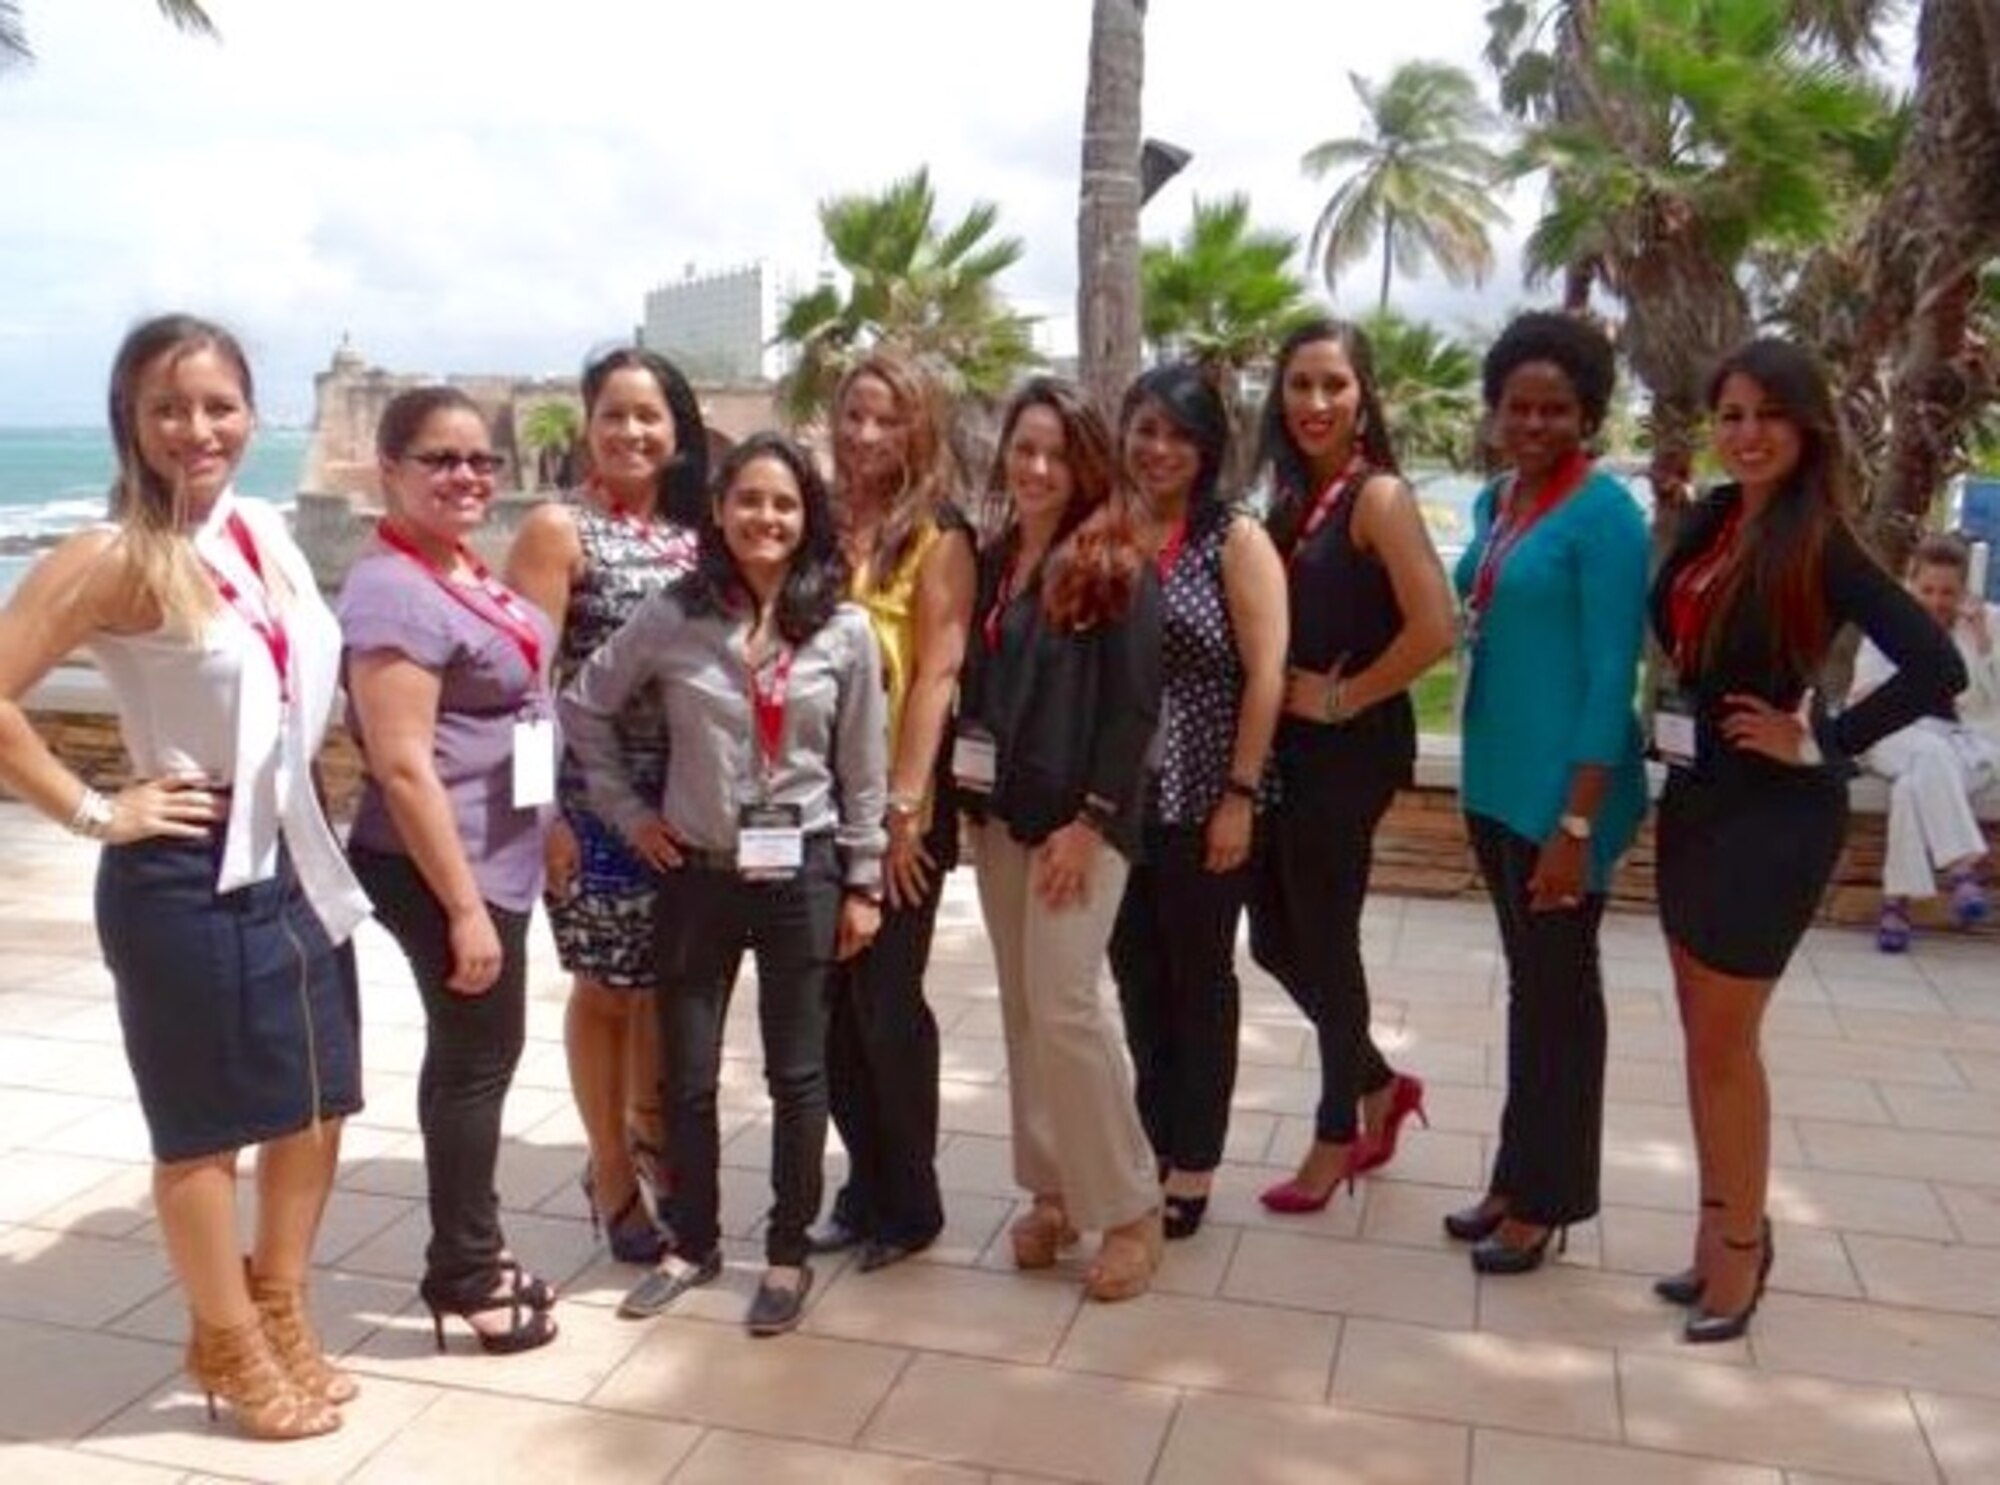 Women from the 156th Airlift Wing attend a ANIMUS women's innovation summit held in San Juan, Puerto Rico late September 2016. Animus is an innovation summit designed to inspire women to reach their highest level of personal and professional development. Courtesy photo by 156th Airlift Wing. 